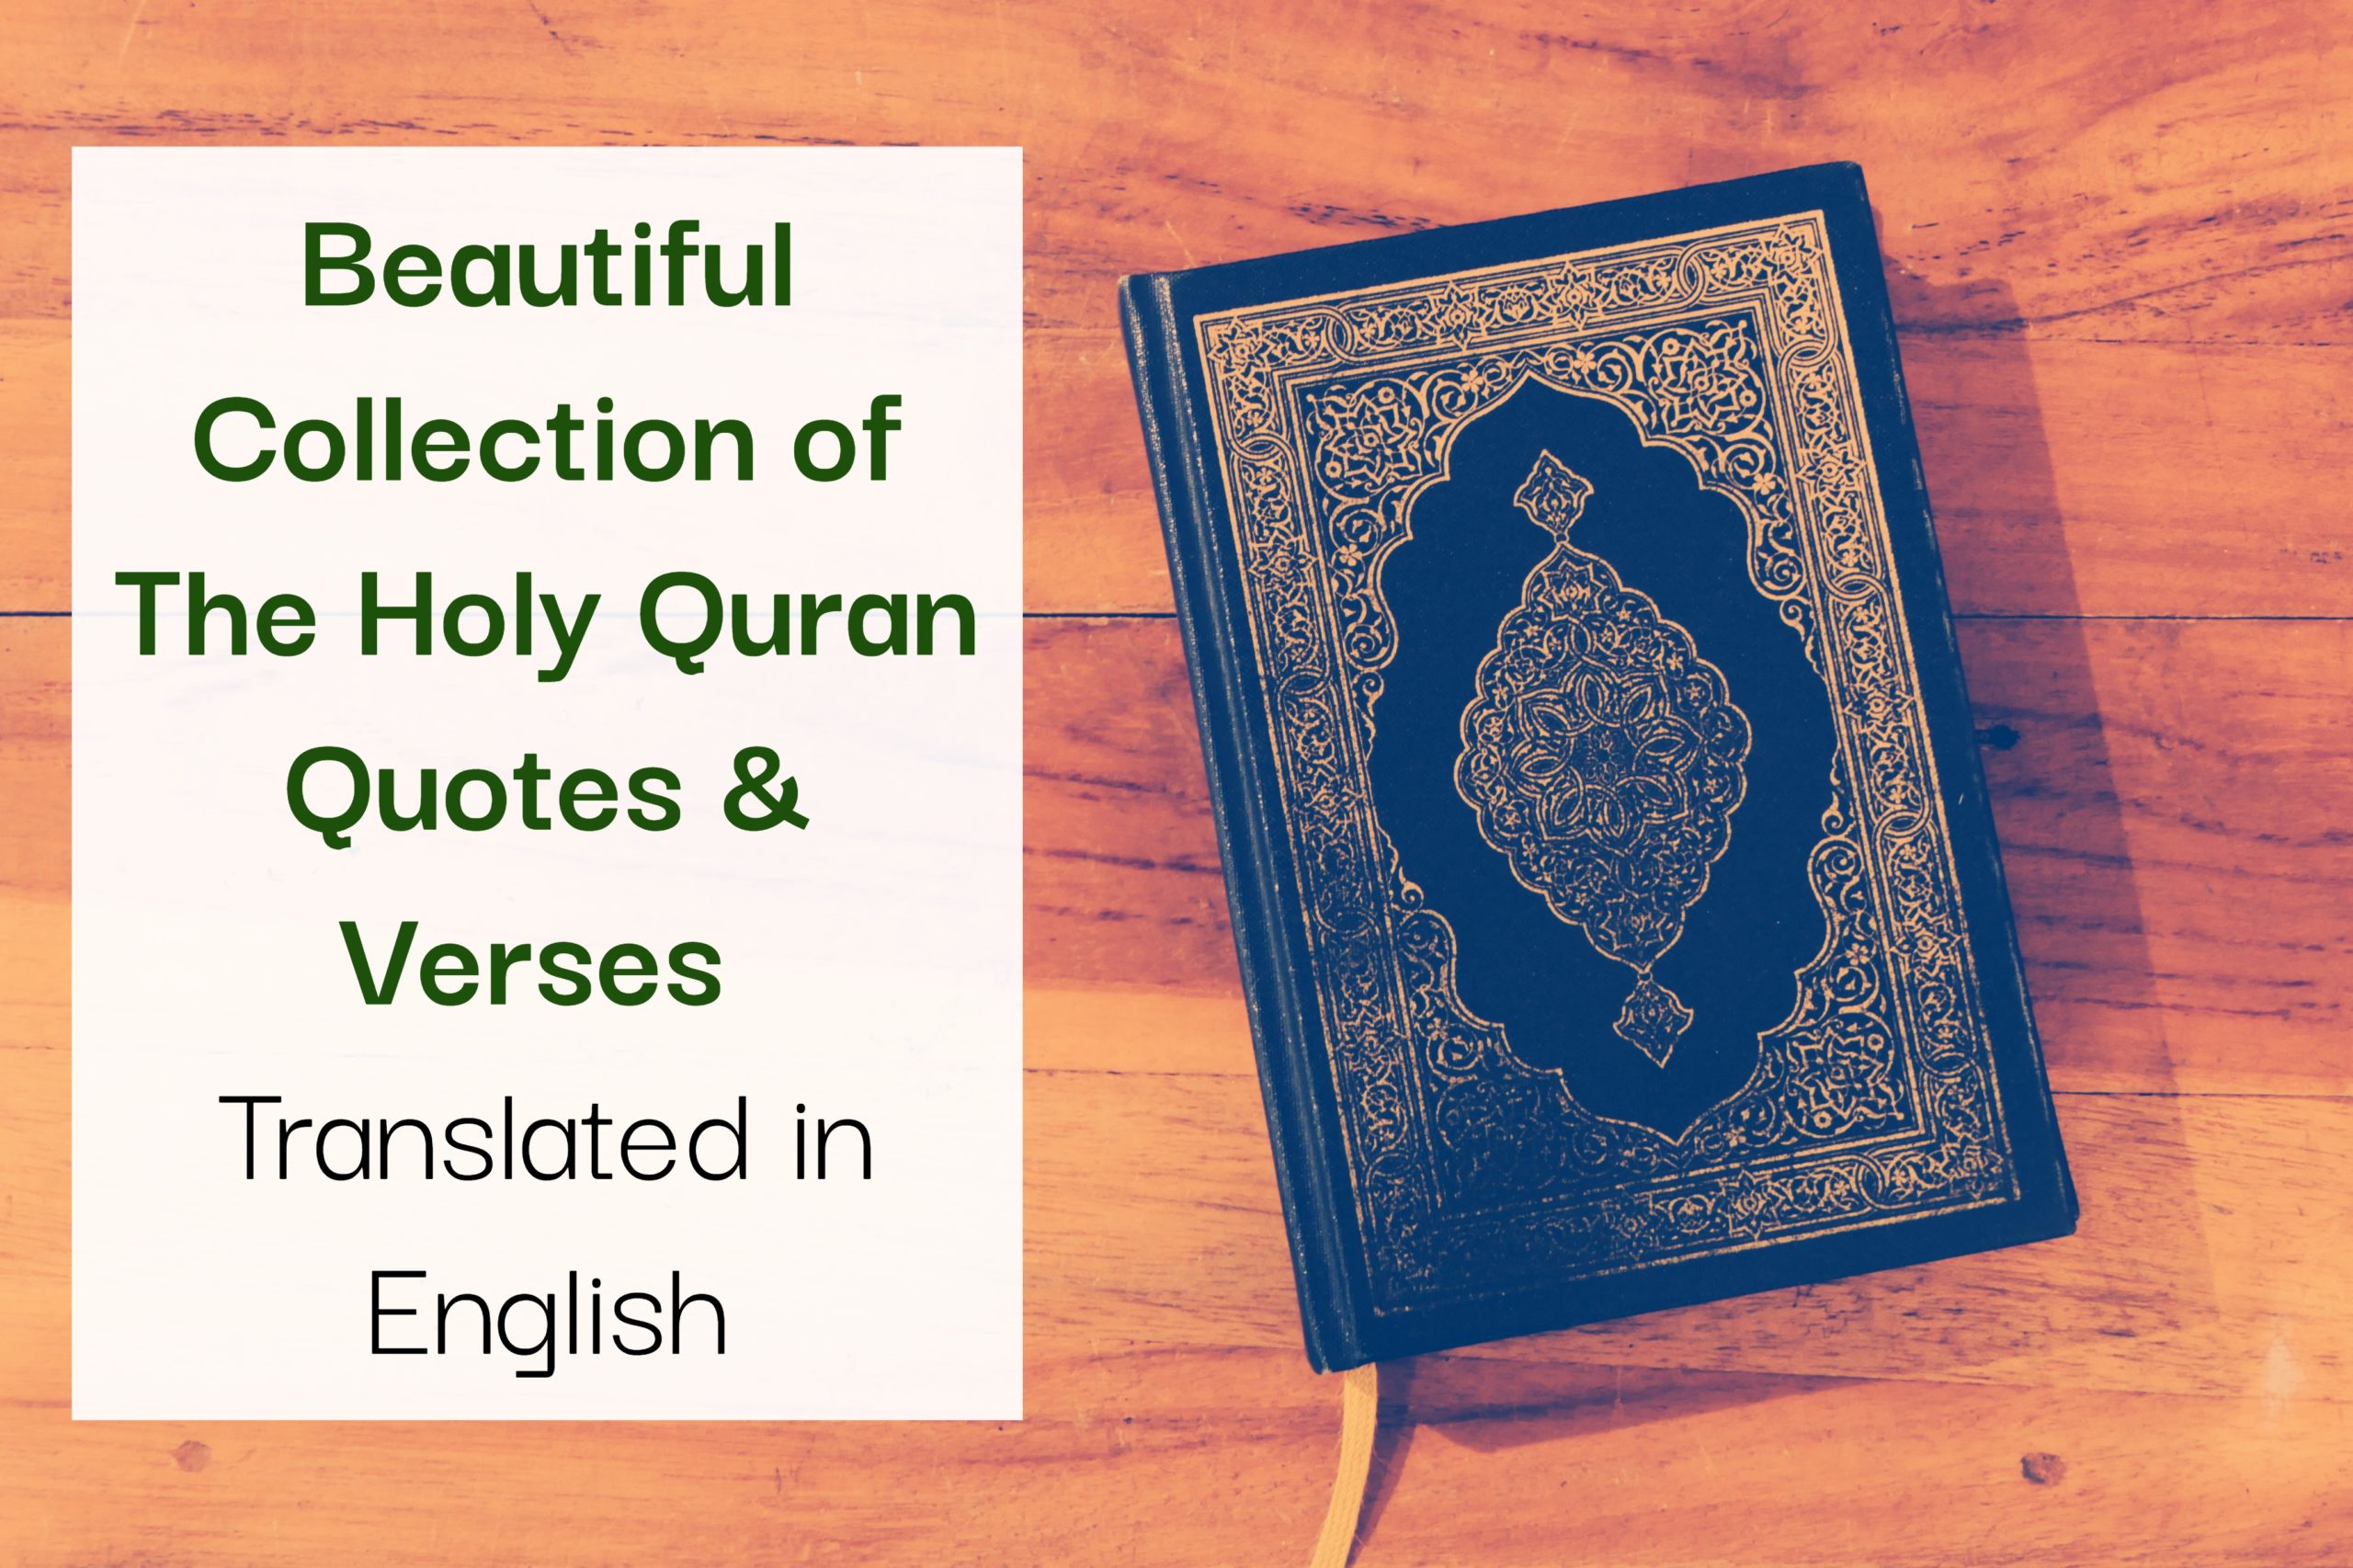 Beautiful Collection of The Holy Quran Quotes & Verses 